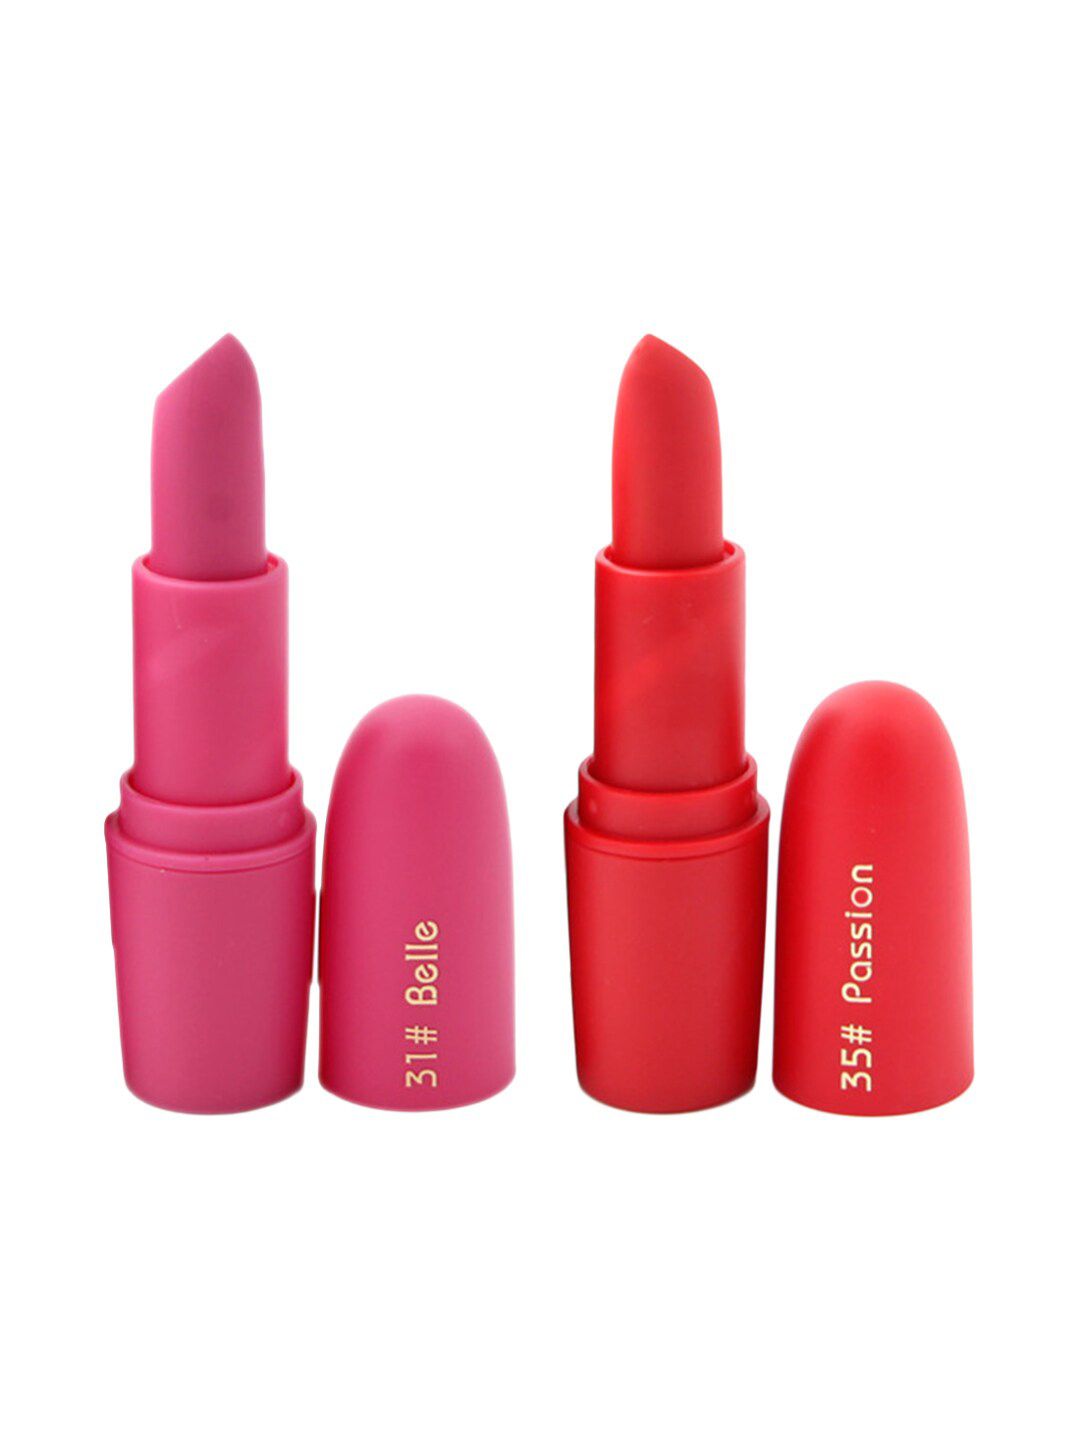 MISS ROSE Professional Make-Up Set of 2 Matte Creamy Lipsticks - Belle 31 & Passion 35 Price in India